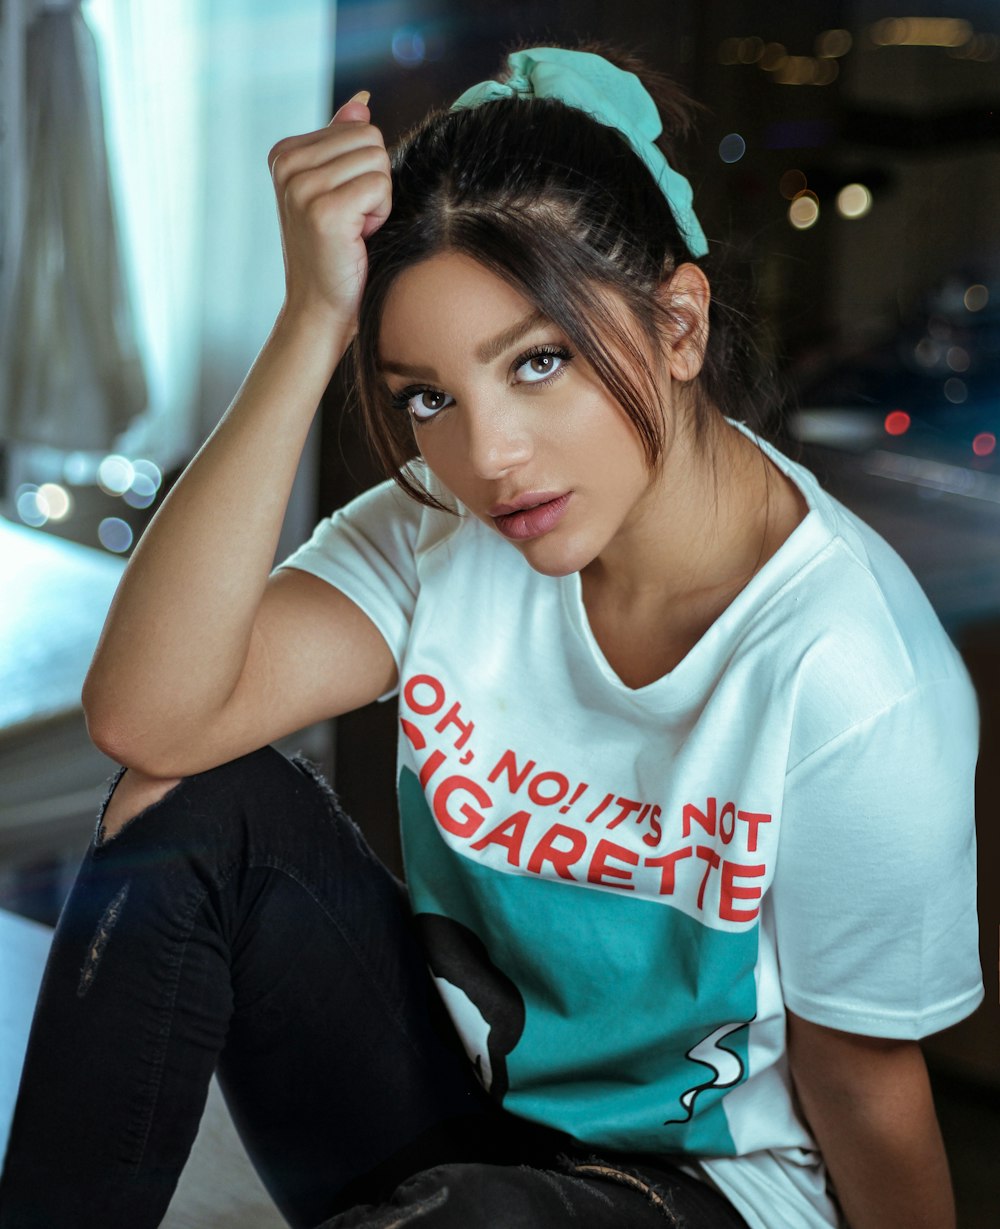 woman wearing grey and teal t-shirt